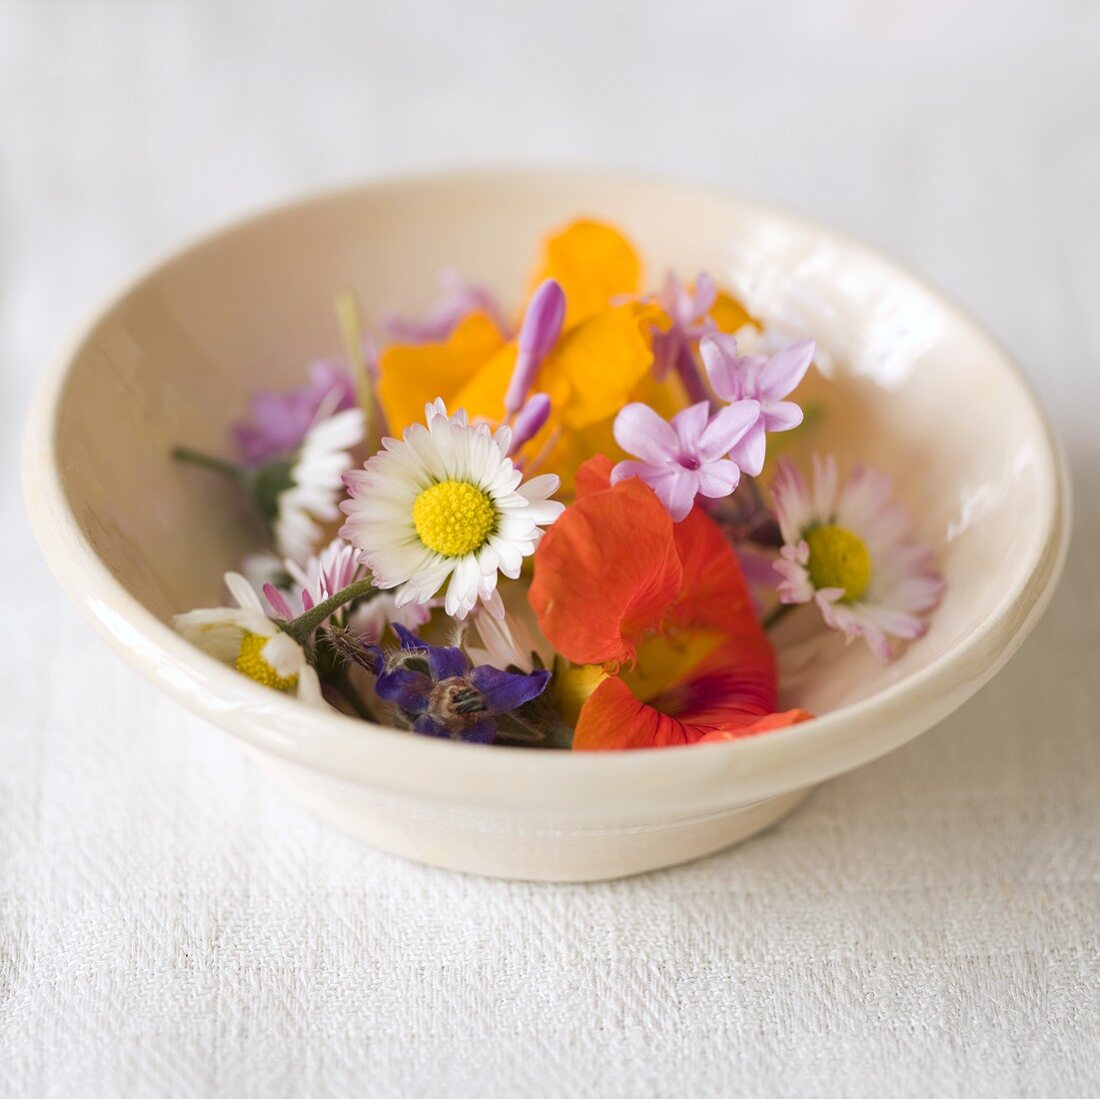 Assorted edible flowers in a ceramic dish